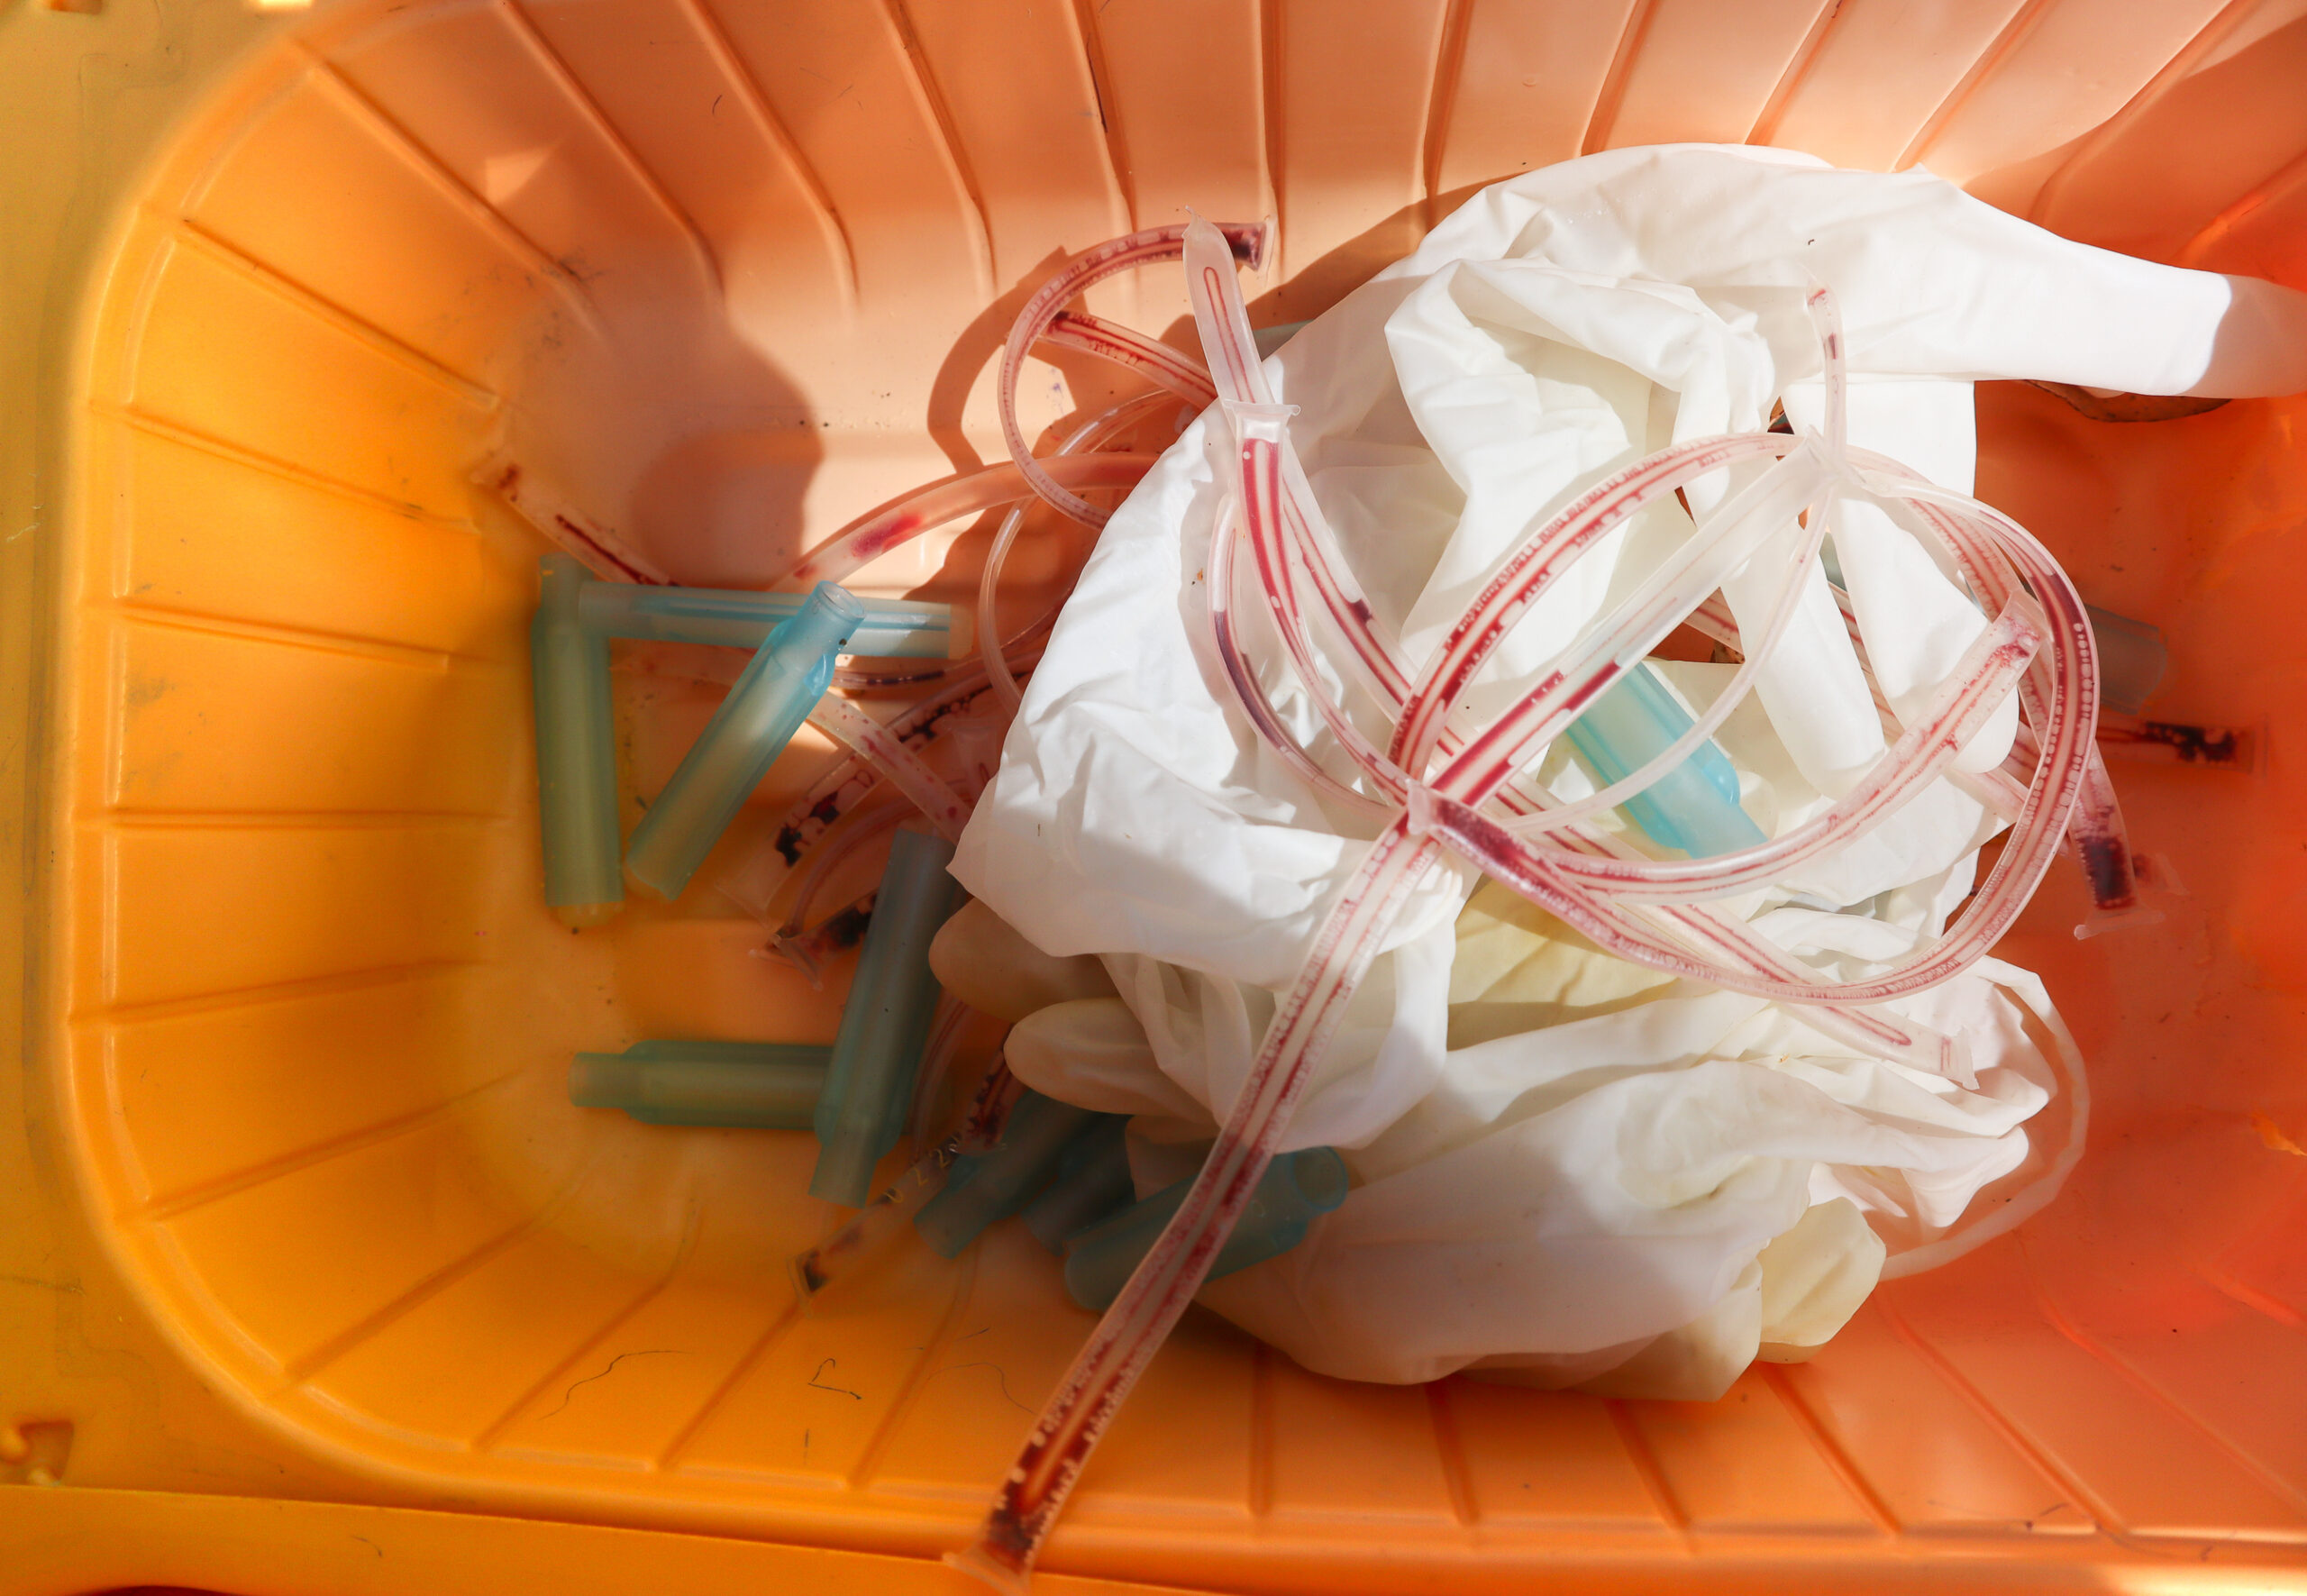 A Properly Organised Disposal of Clinical Waste Has Many Benefits